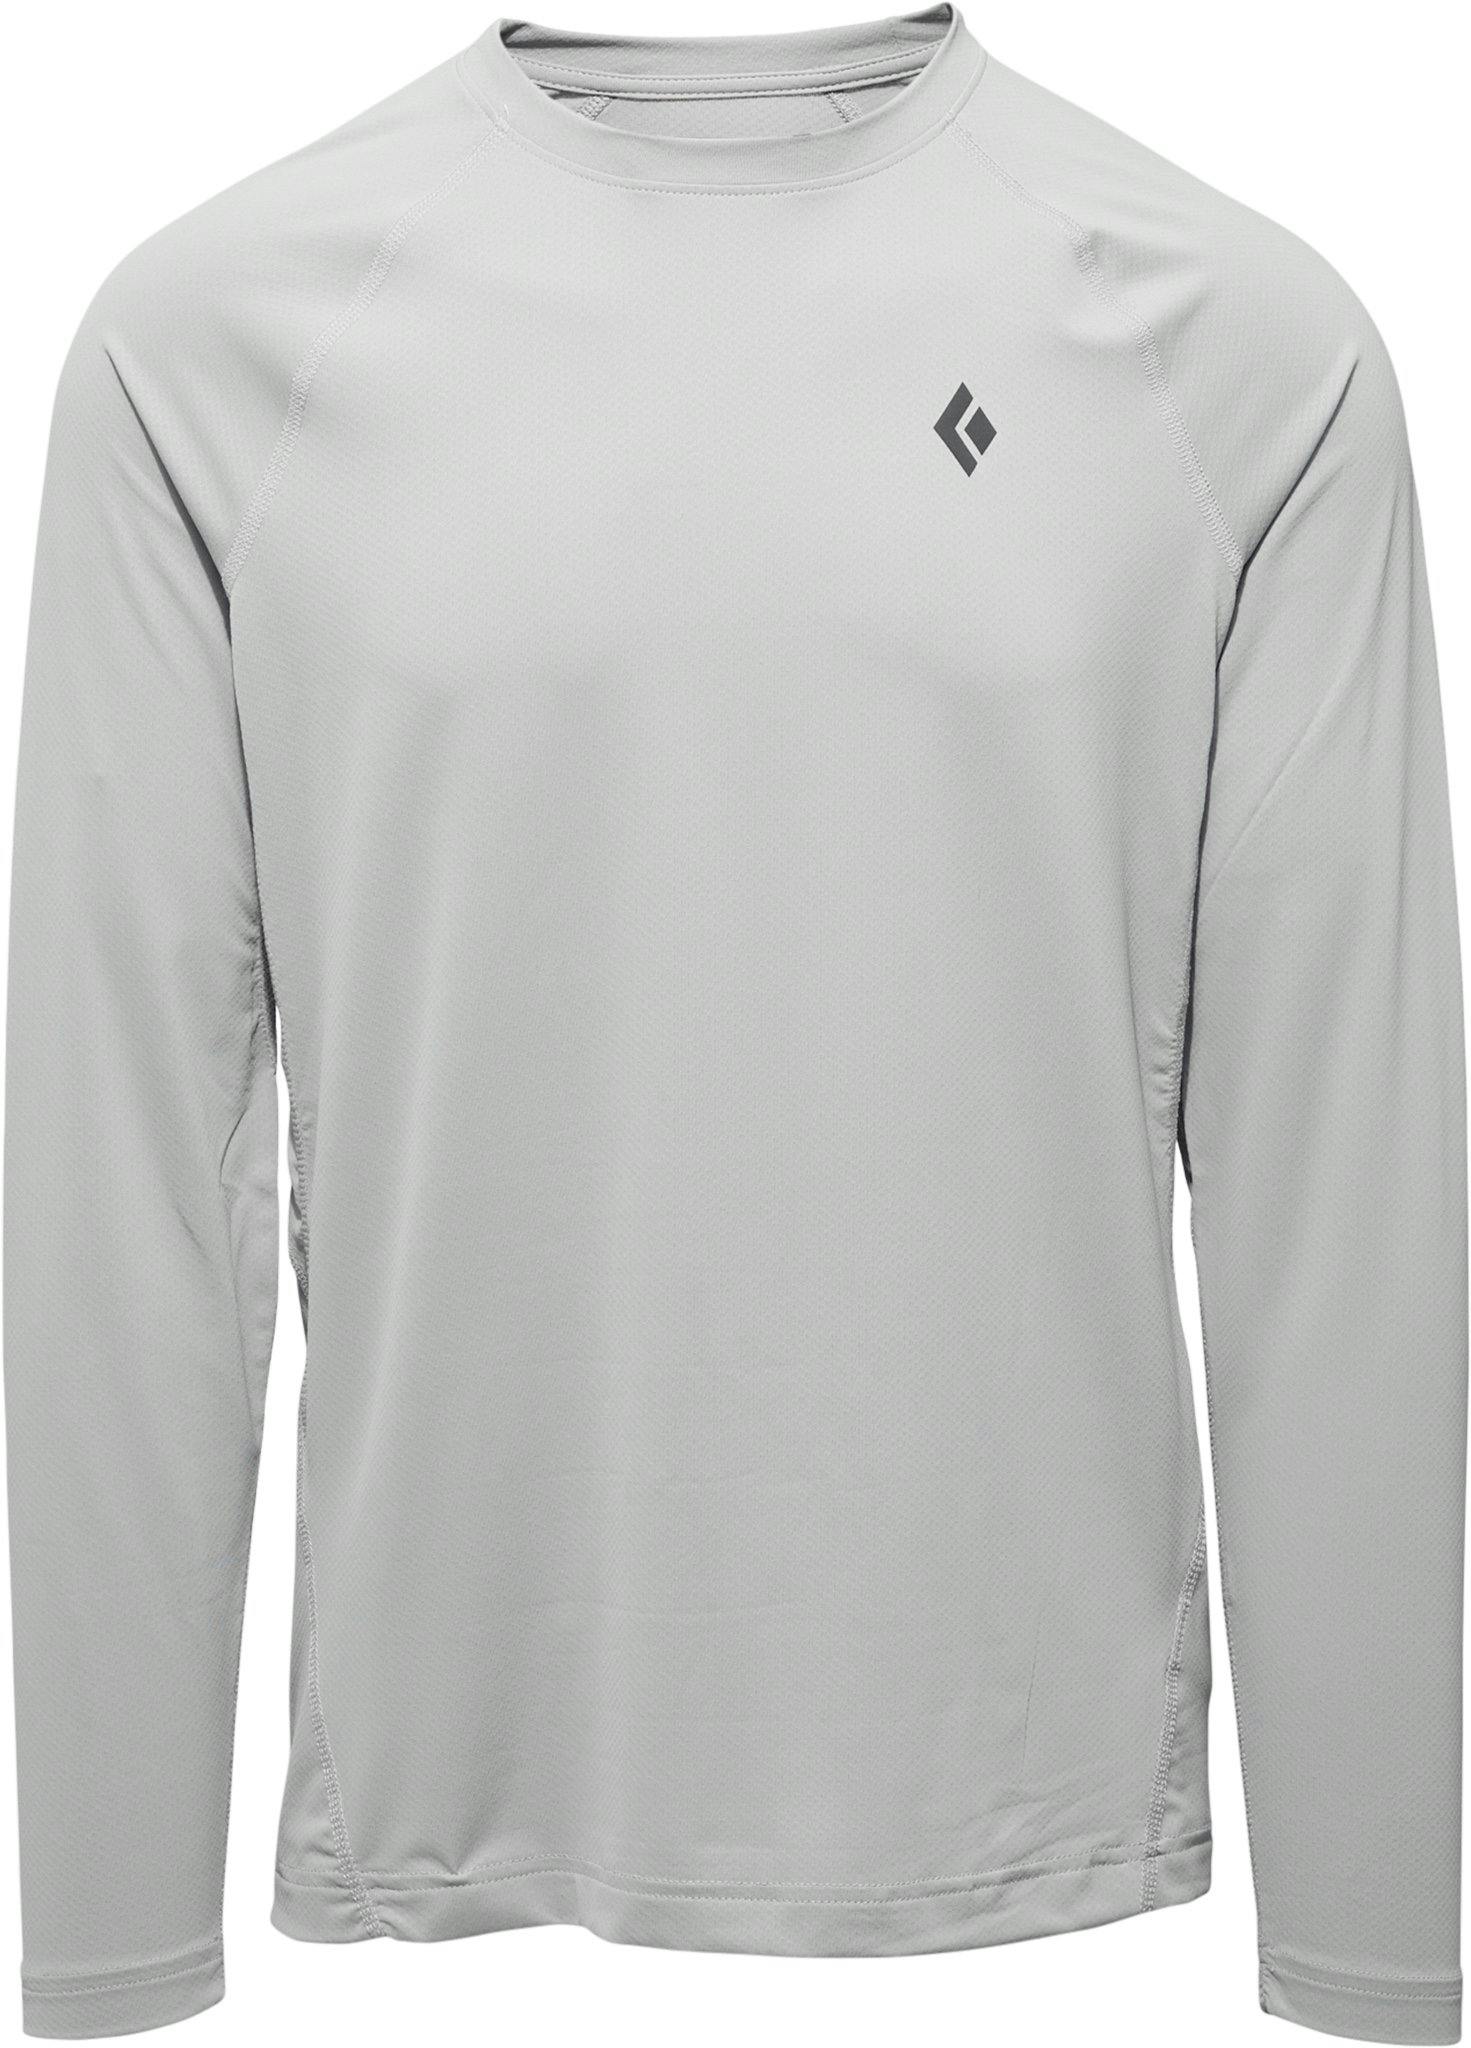 Product image for Alpenglow Long Sleeve Crew - Men's